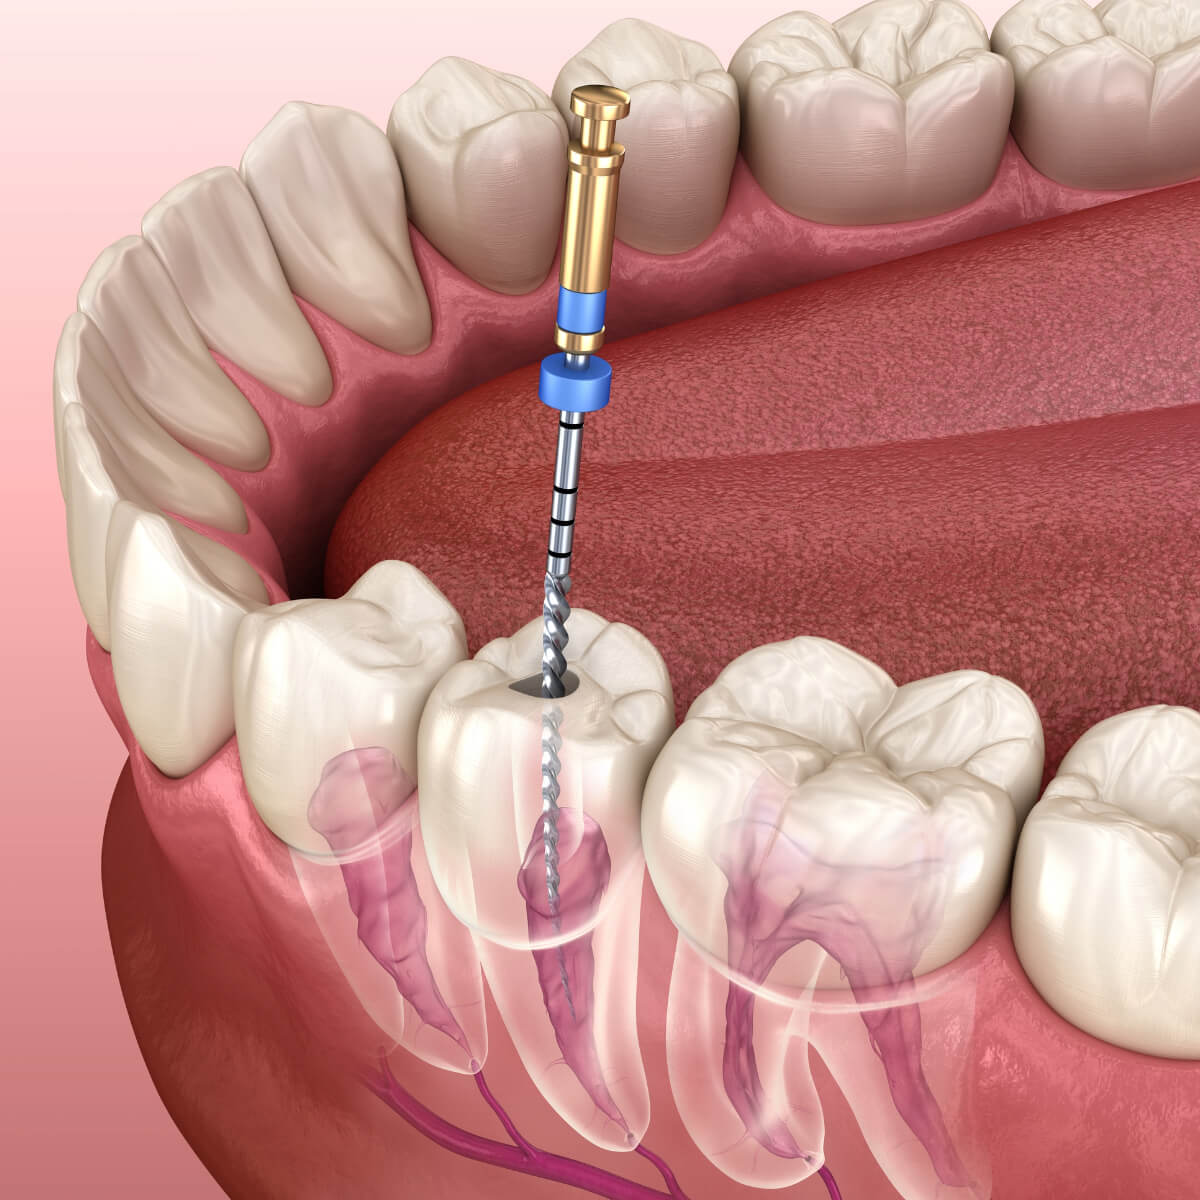 Painless Root Canal Treatment in Los Angeles CA area